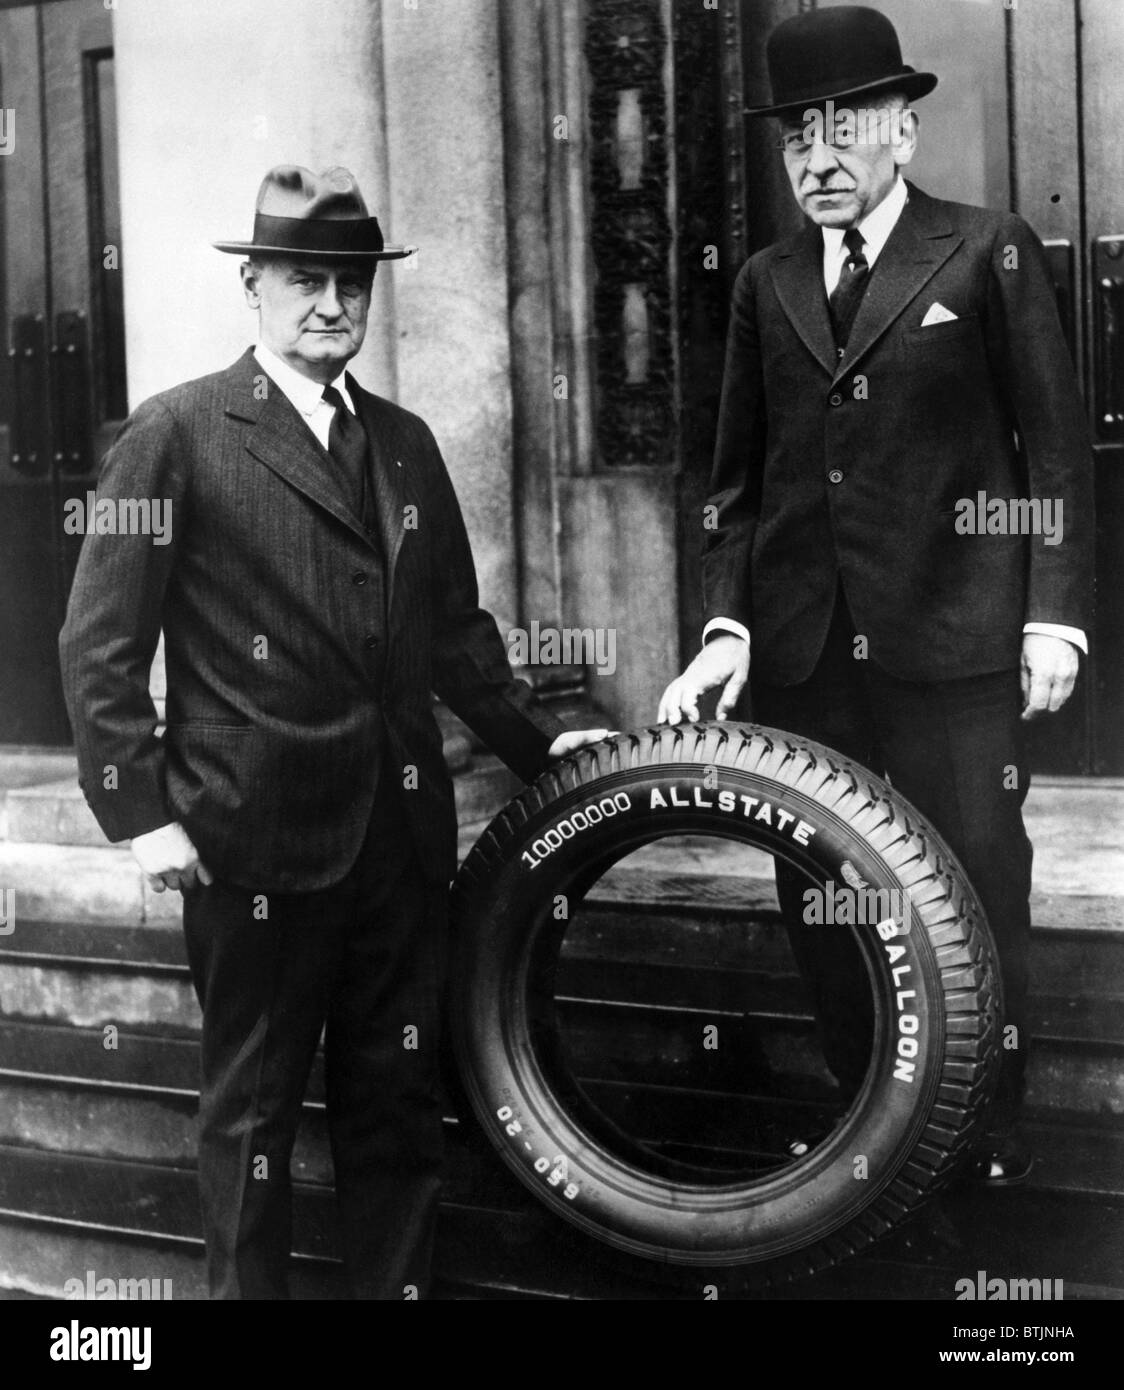 Robert E. Wood (left), Julius Rosenwald (right), owners of 'Sears, Roebuck, and Company', c. 1920's. Stock Photo